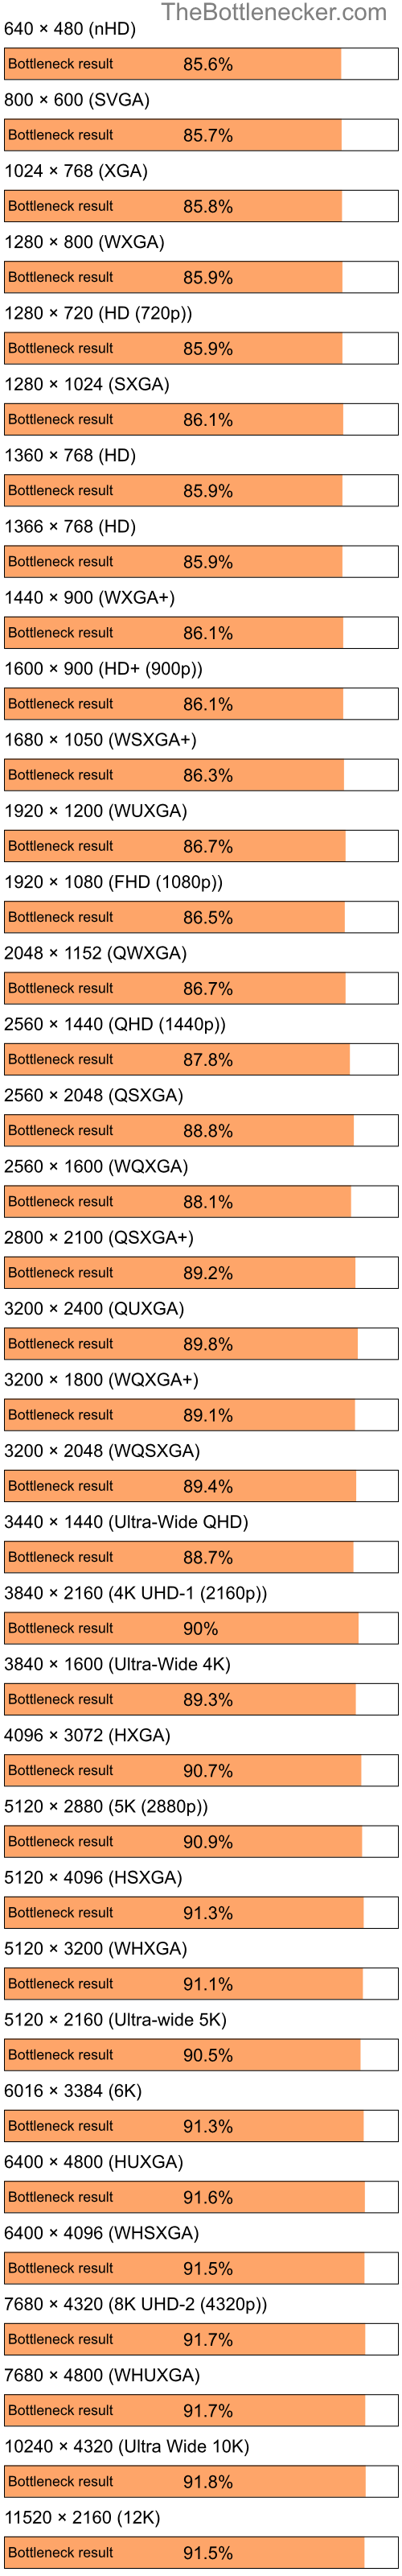 Bottleneck results by resolution for Intel Atom Z520 and NVIDIA GeForce FX Go 5600 in Graphic Card Intense Tasks